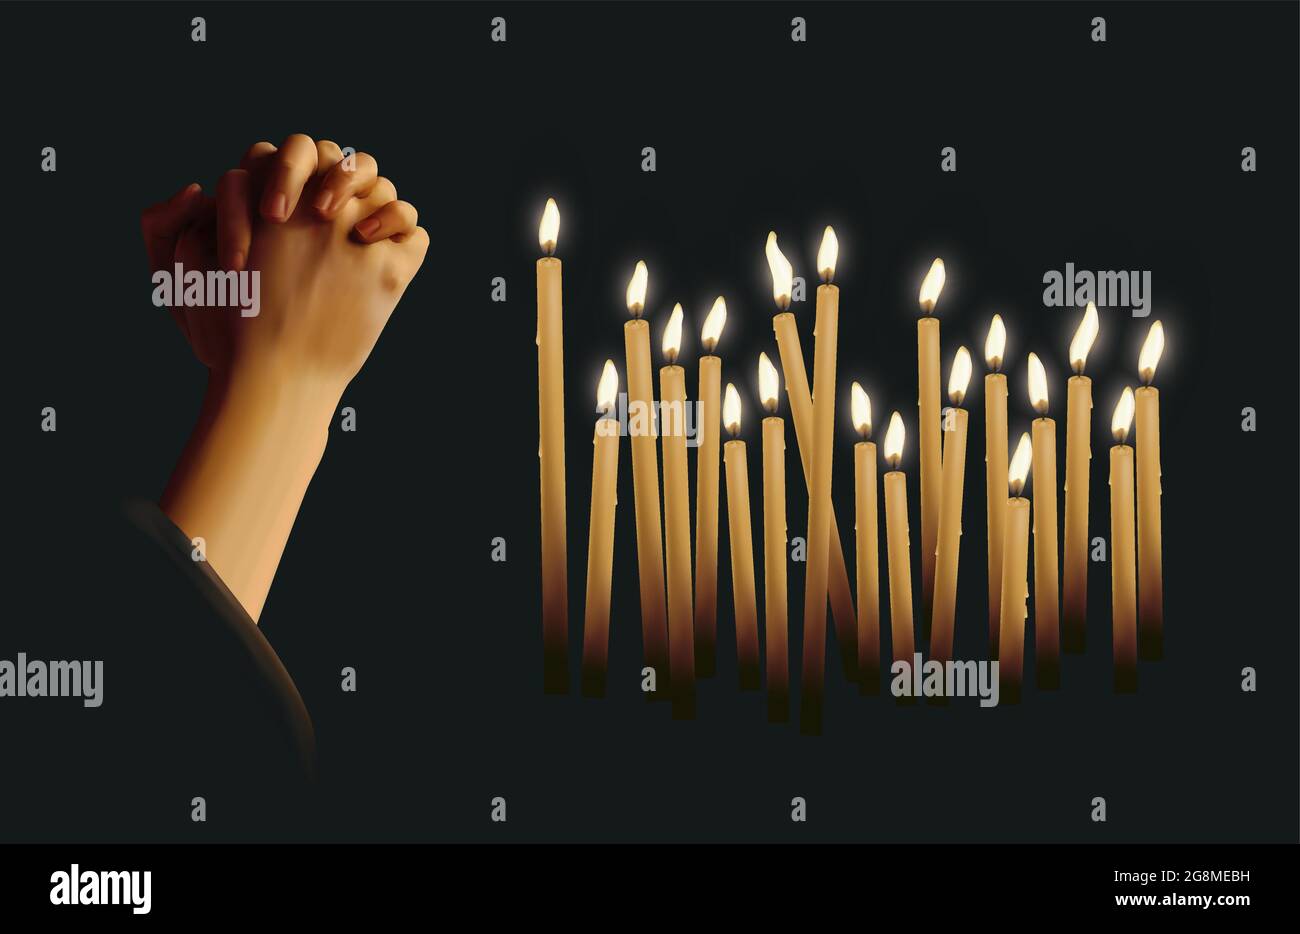 Realistic vector illustration of hands clasped in prayer with lit candles against dark background Stock Vector